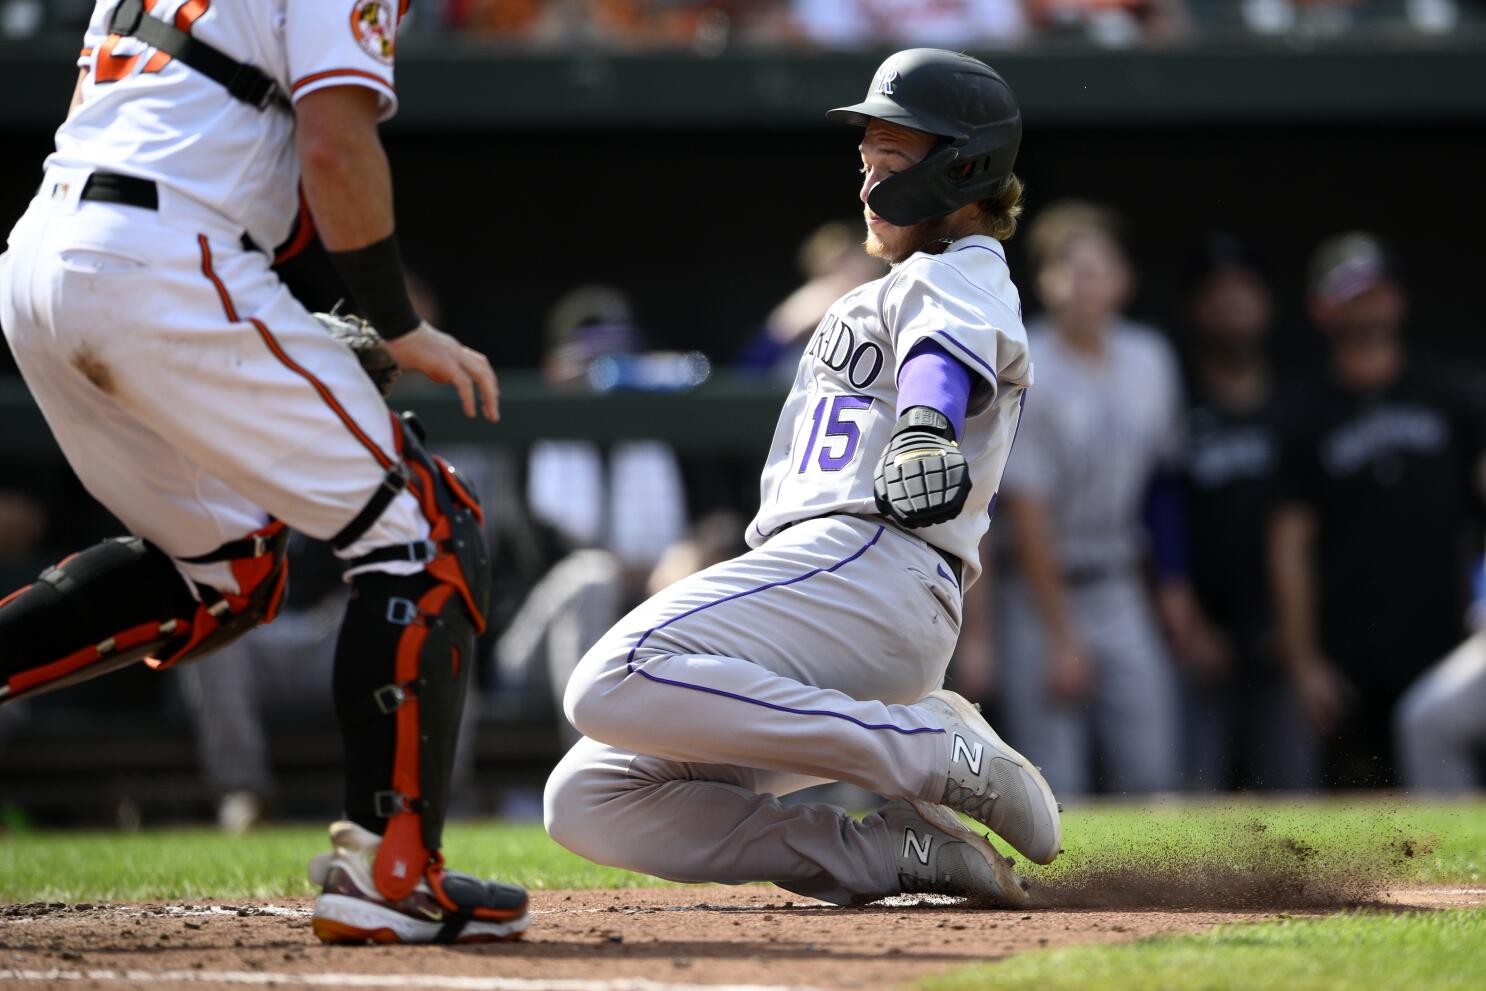 Rockies awarded one very sad All-Star selection since MLB requires